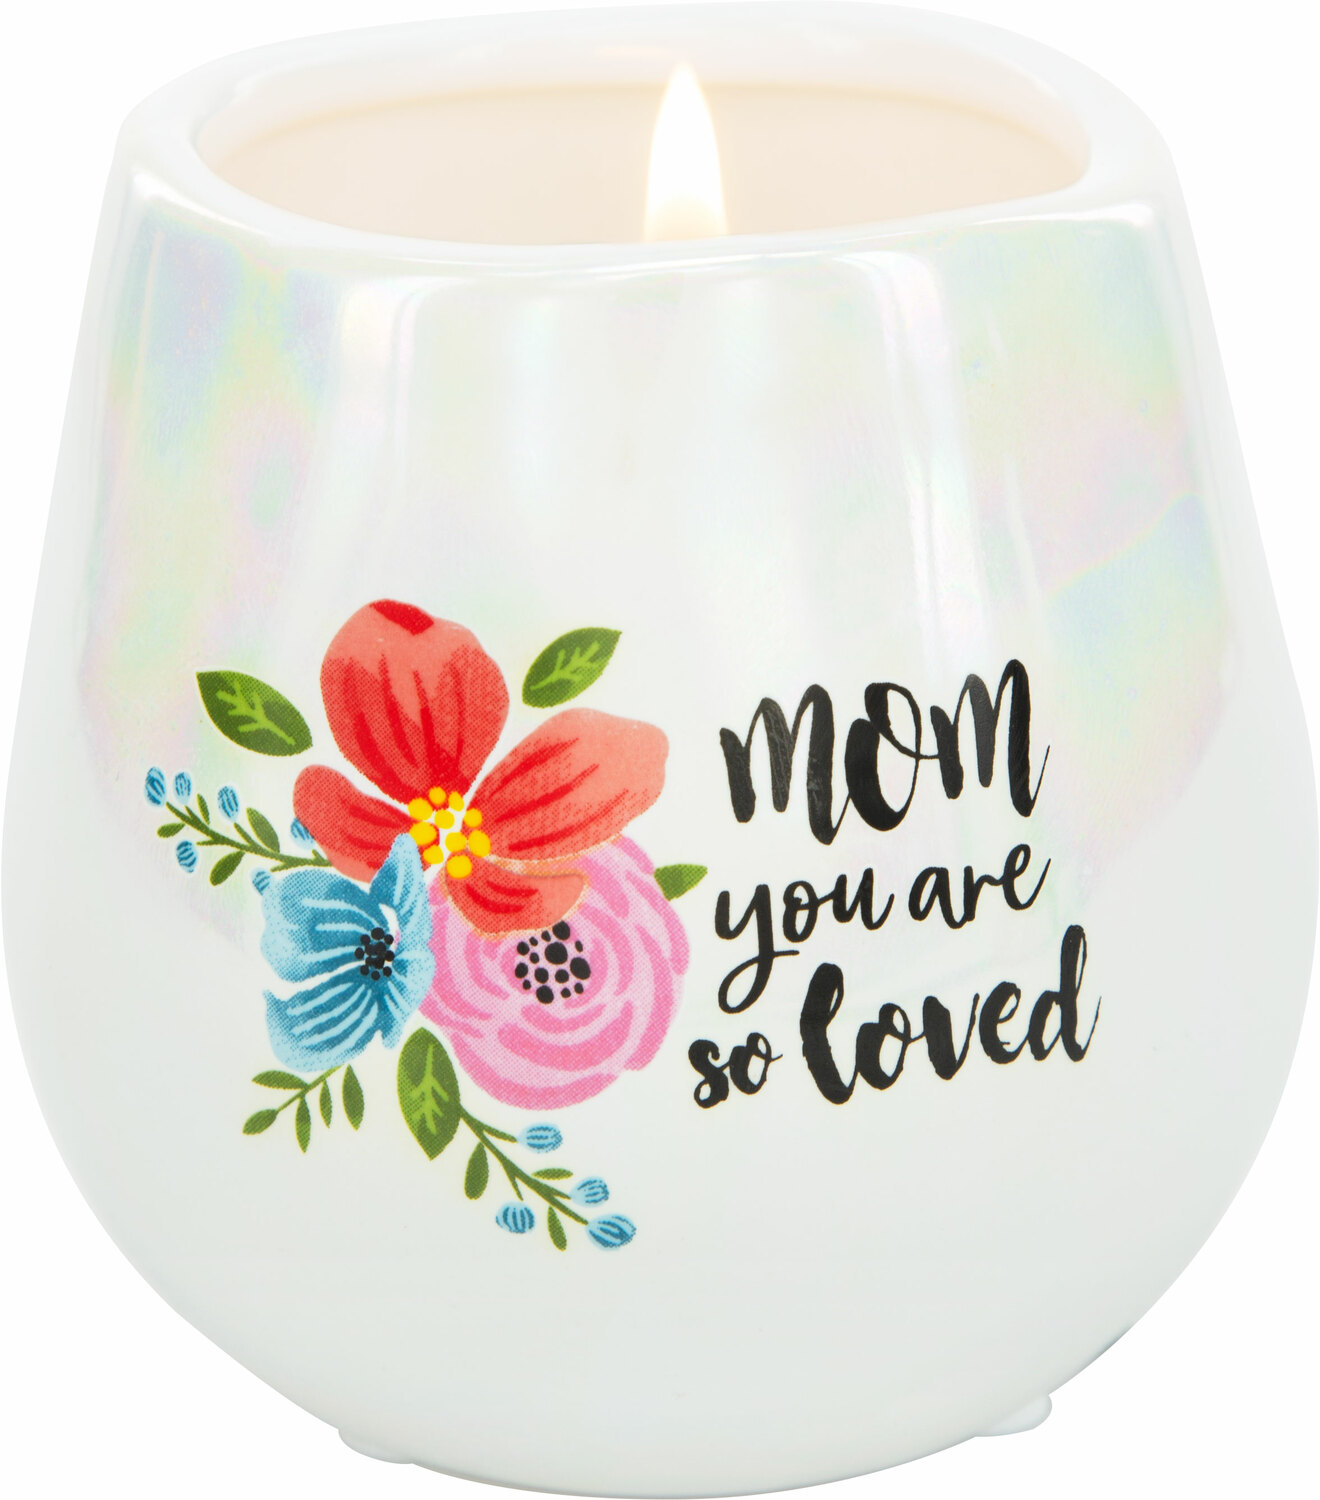 Mom by Bunches of Love - Mom - 8 oz - 100% Soy Wax Candle
Scent: Serenity